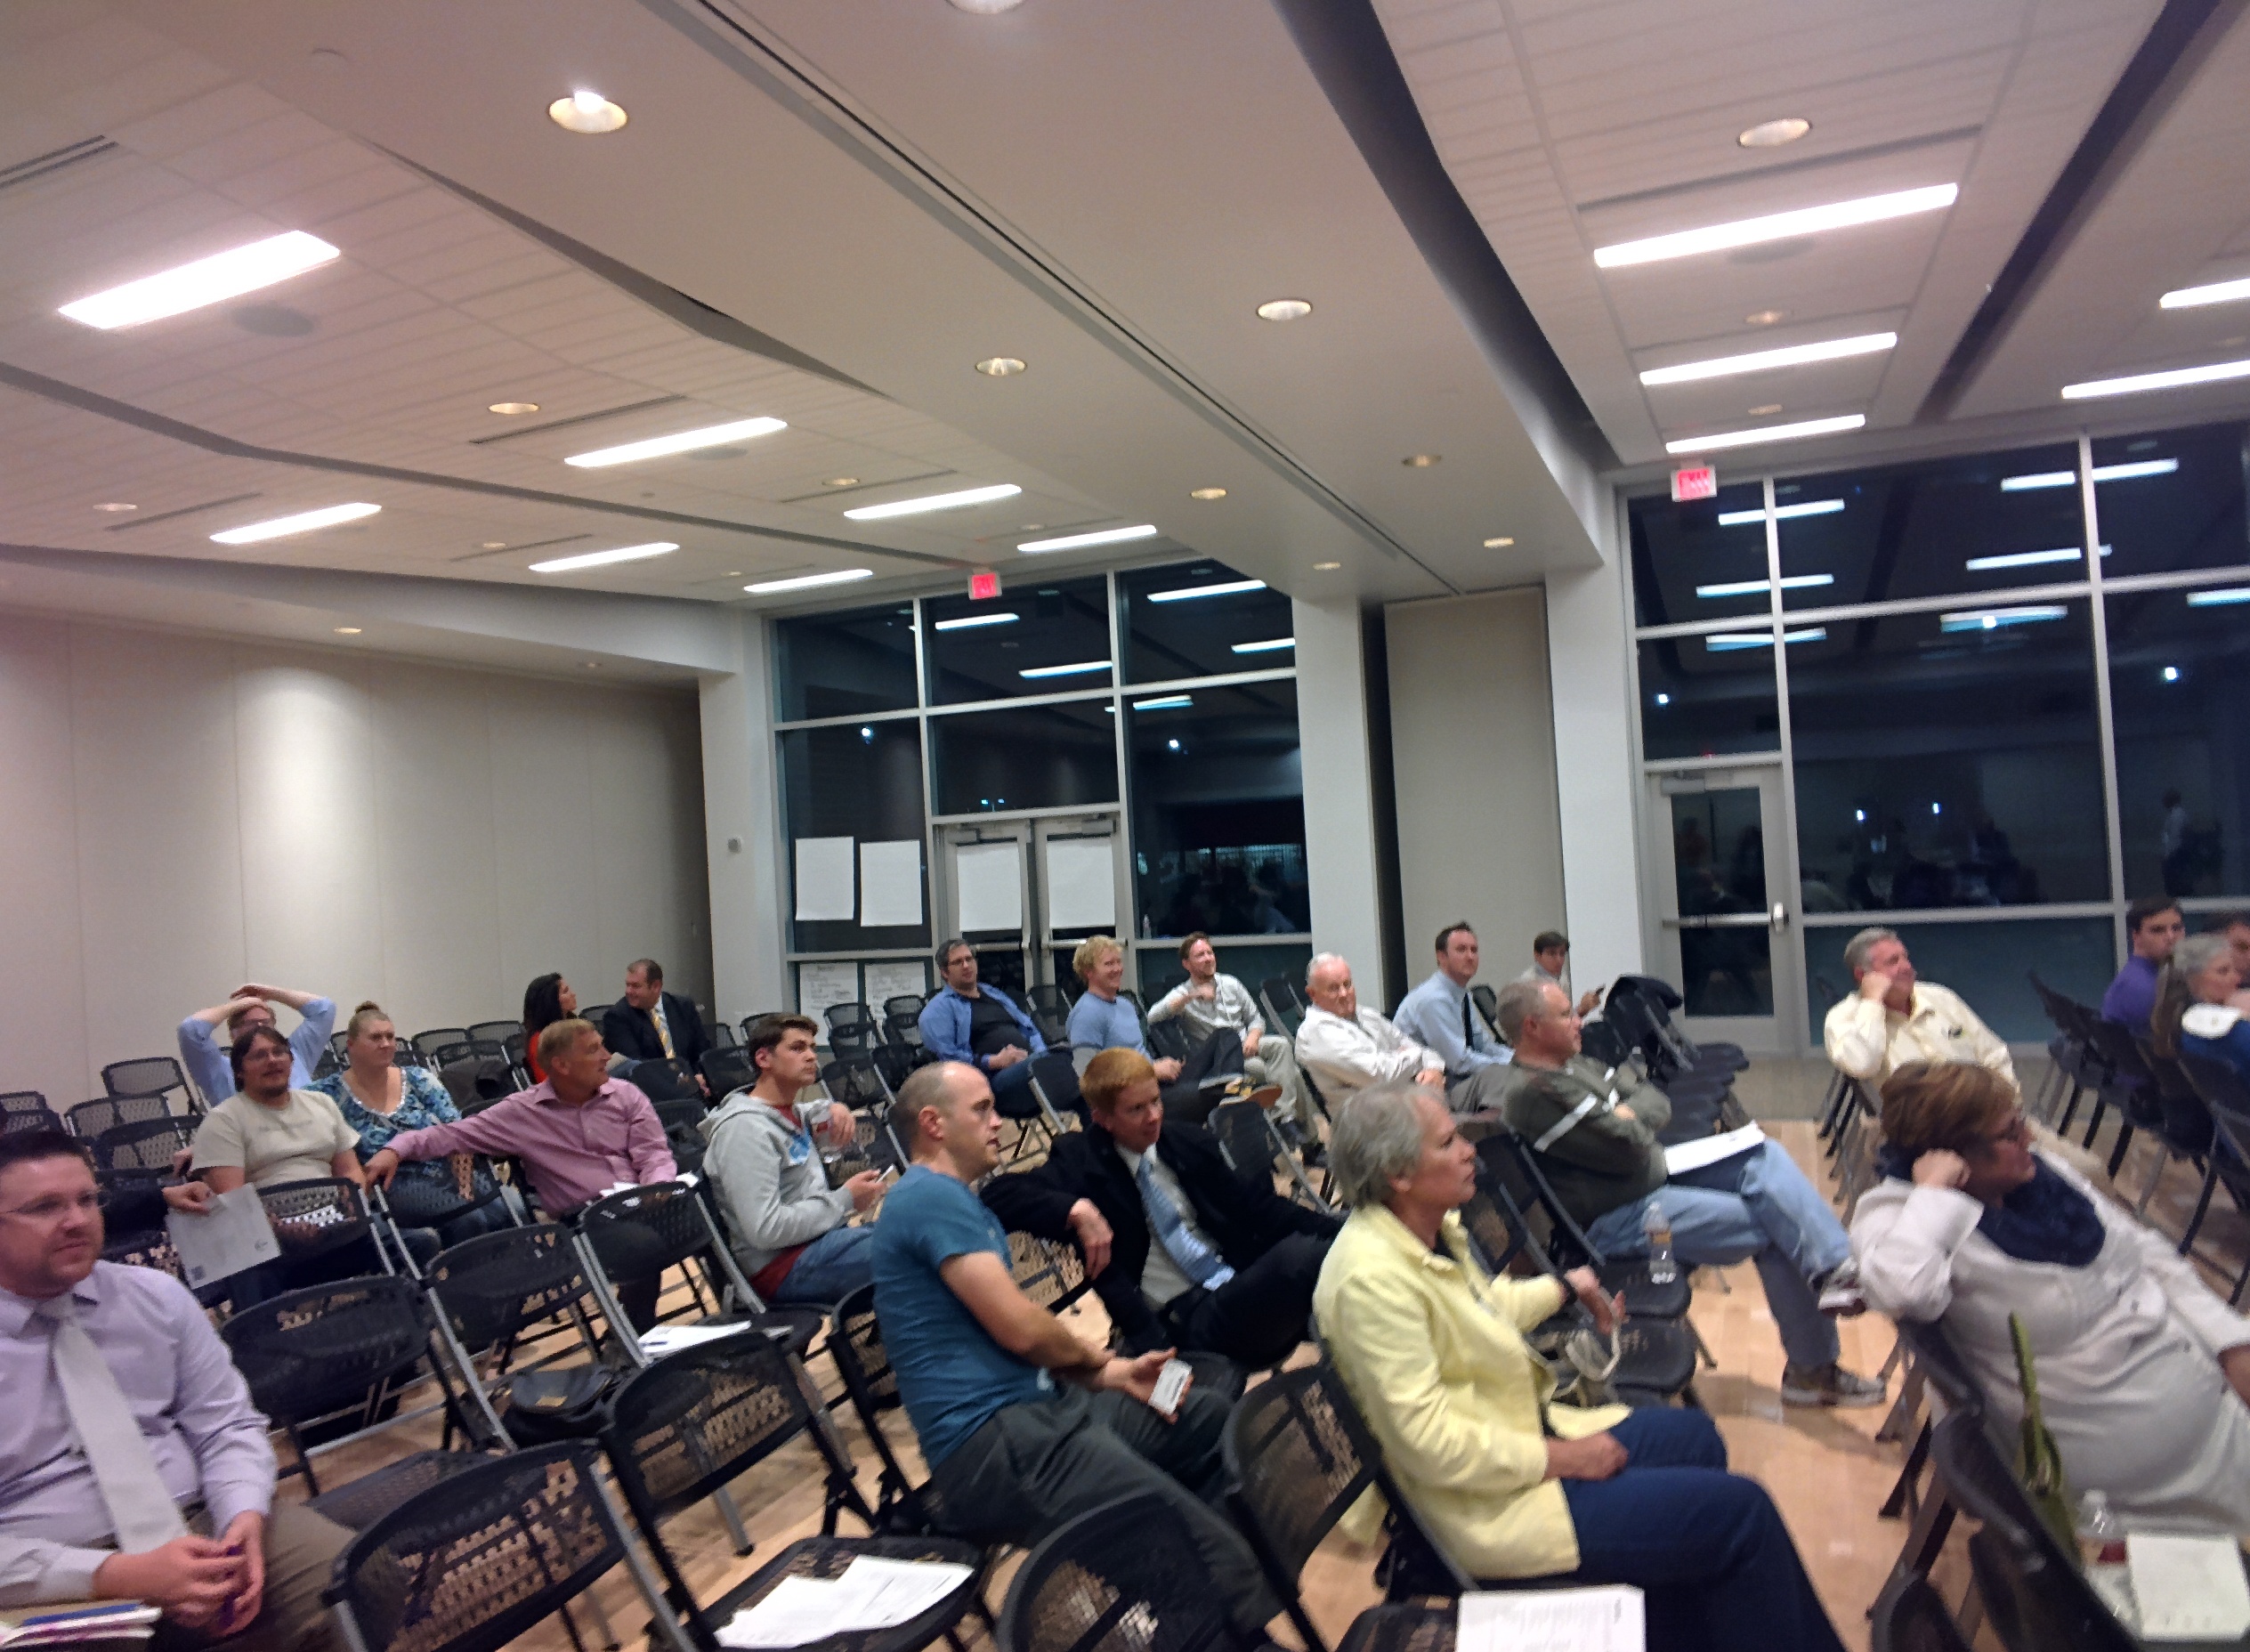 The Crowd at the "Provo Accelerated" Event on October 28, 2014